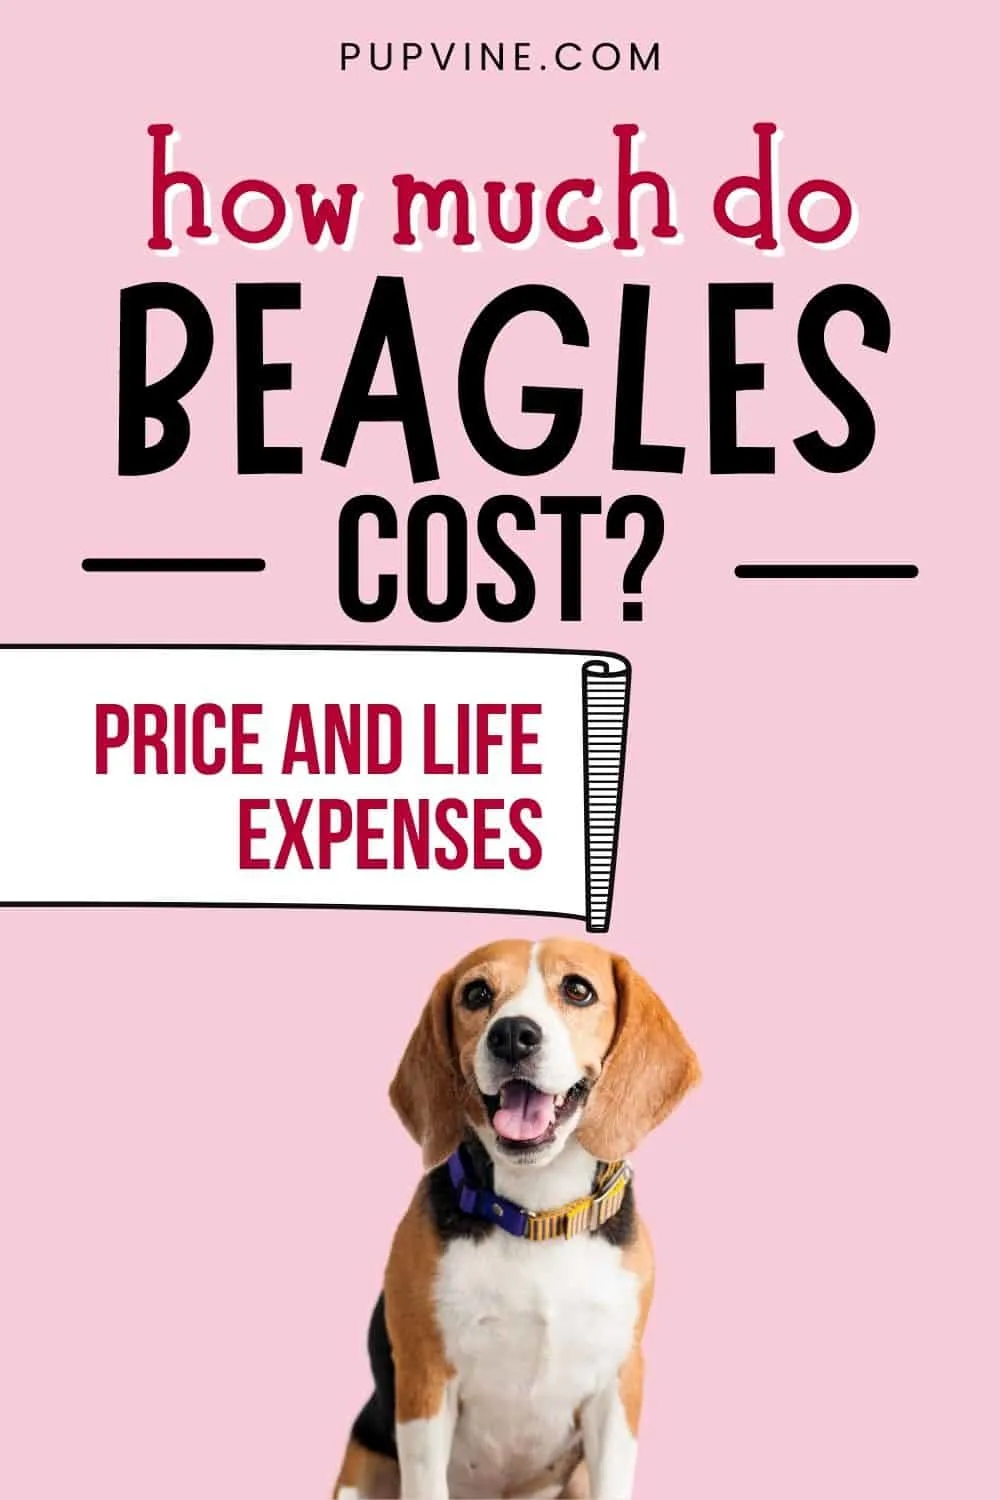 How Much Do Beagles Cost? Price And Life Expenses